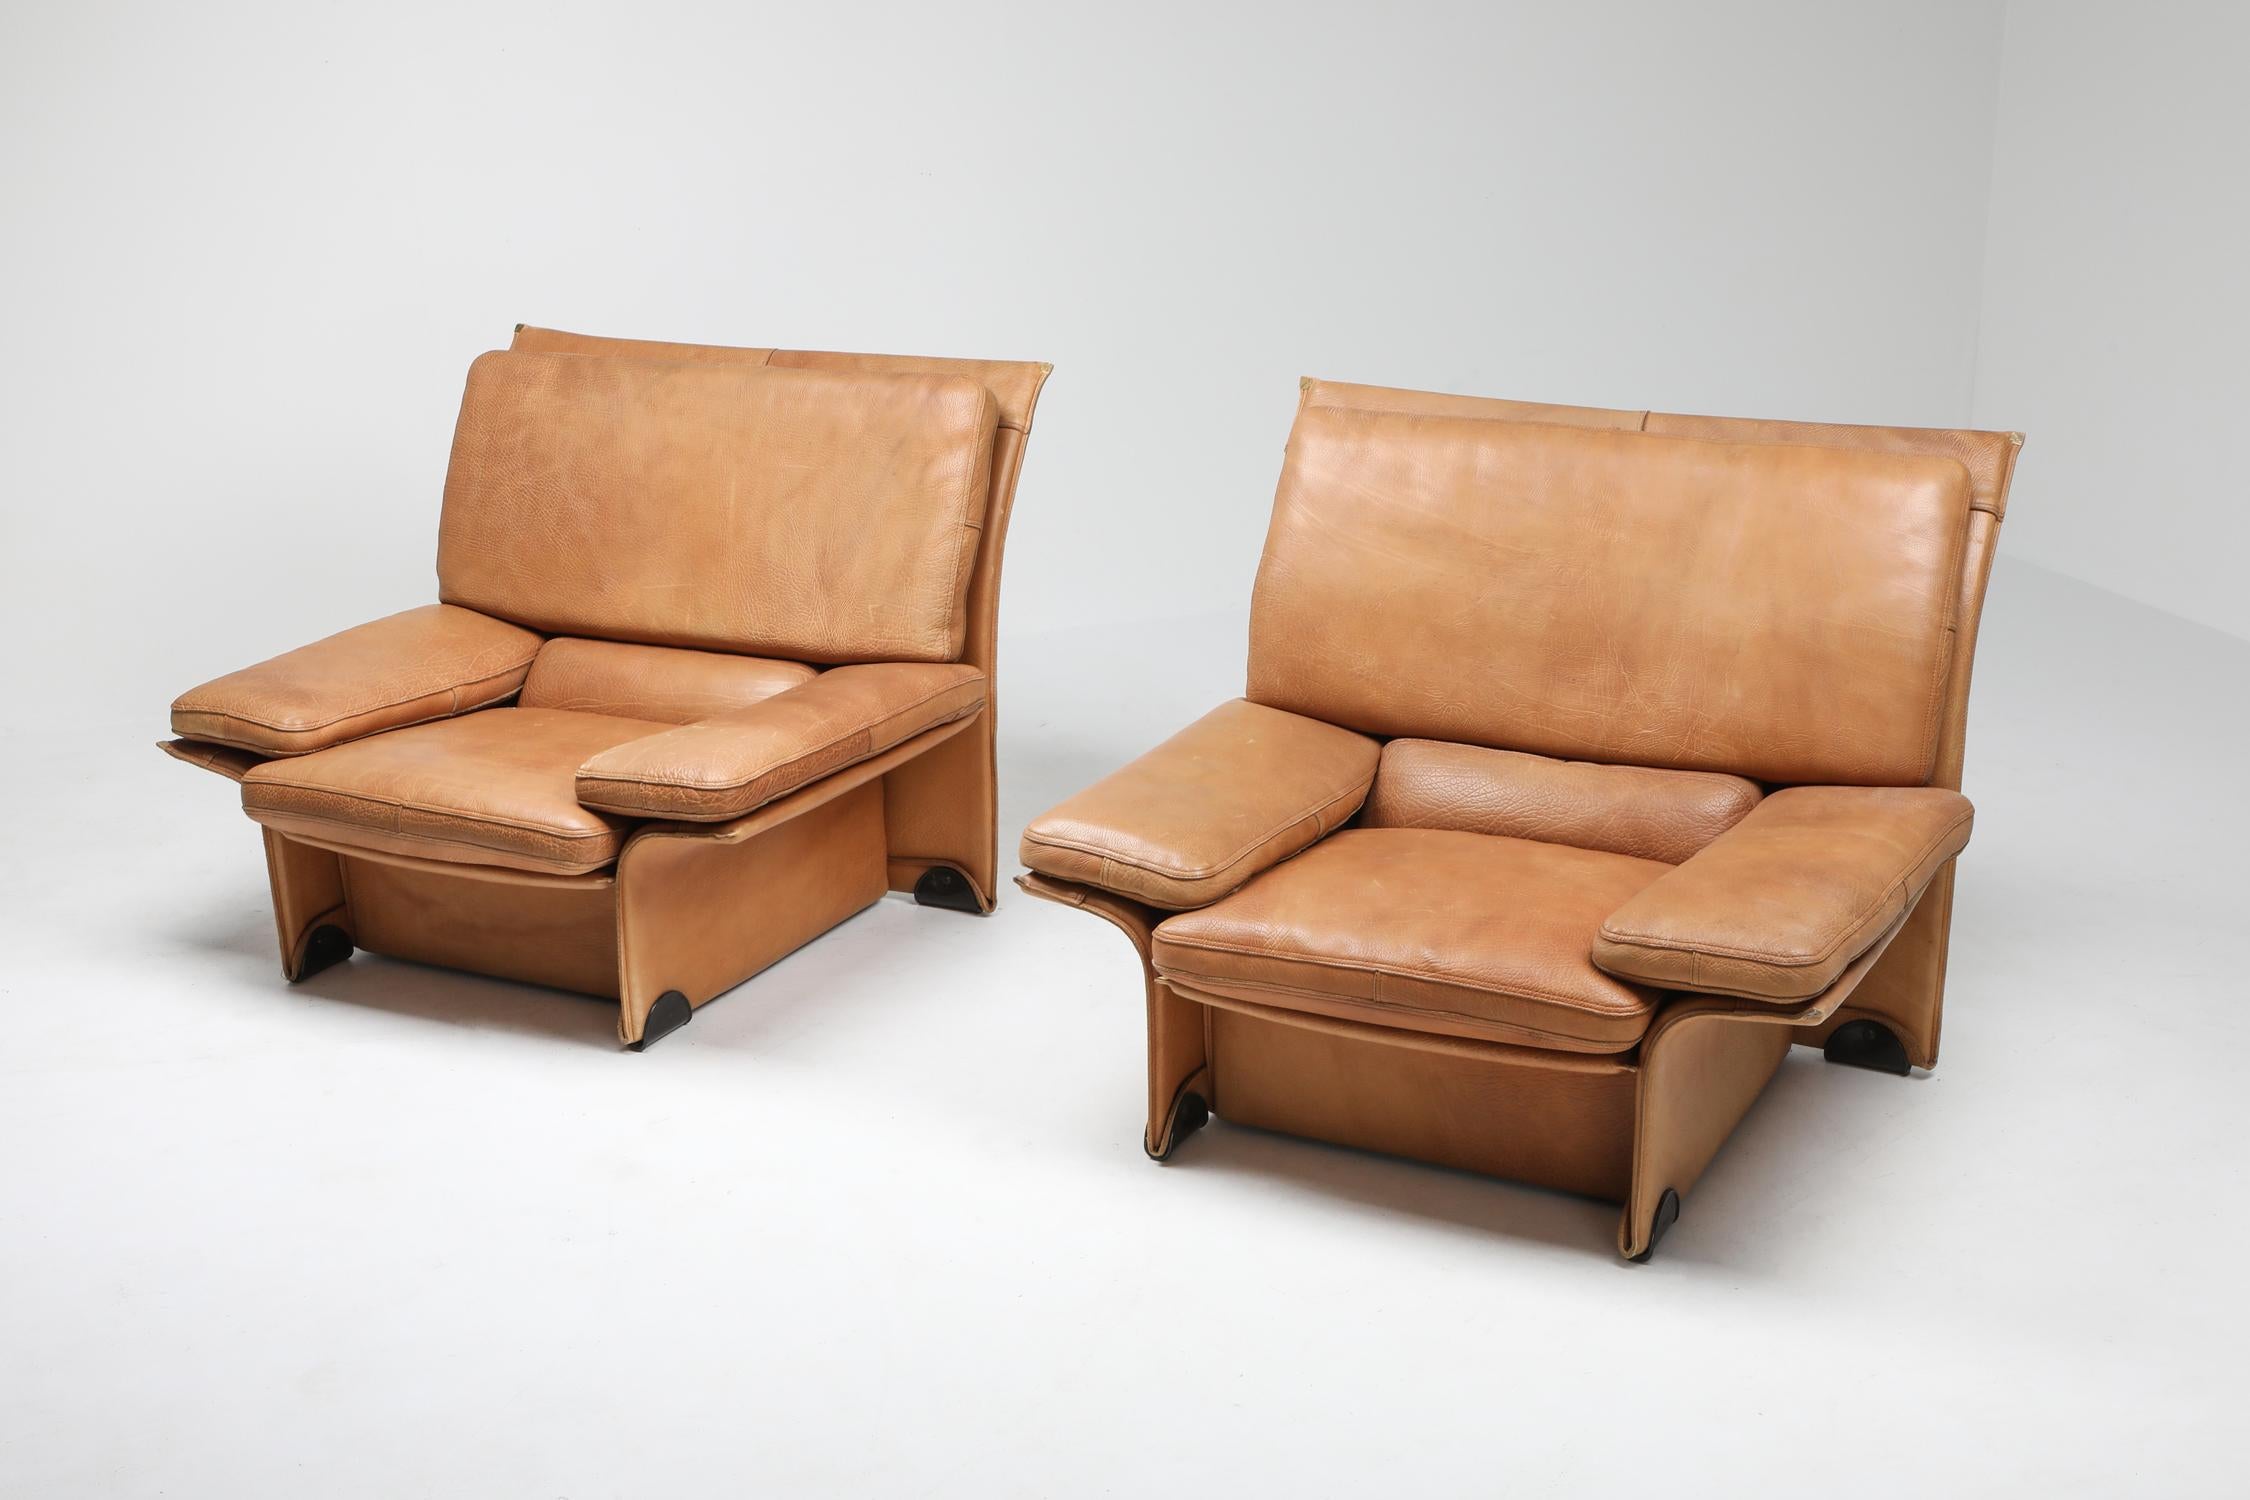 Buffalo leather edition designed by Titiana Ammannati & Giampiero Vitelli in 1976 for Brunati, Italy.
This pair of lounge chairs combines great design, the best quality of materials, and amazing comfort.
Fits well in a Scandinavian of Brazilian